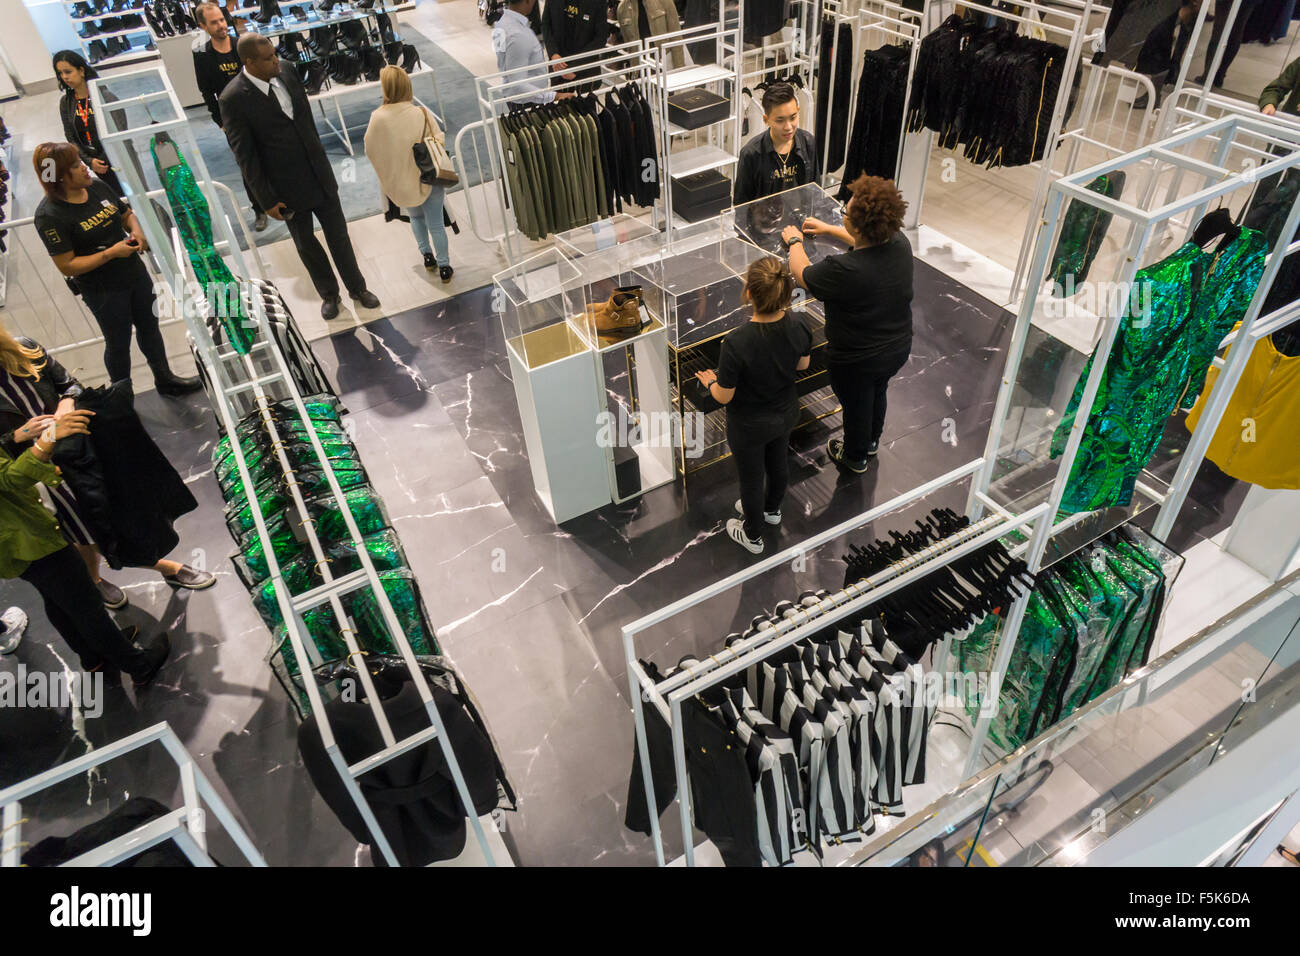 New York, USA. 05th Nov, 2015. Shoppers in the designated Balmain x H&M section of an H&M store in New York on Thursday, November 5, 2015. The collection, designed by the young head of Balmain, Olivier Rousteing, was highly anticipated by fashionistas and drew crowds around the world. In New York H&M instituted a wristband system to time when shoppers could arrive to control crowds. Credit:  Richard Levine/Alamy Live News Stock Photo